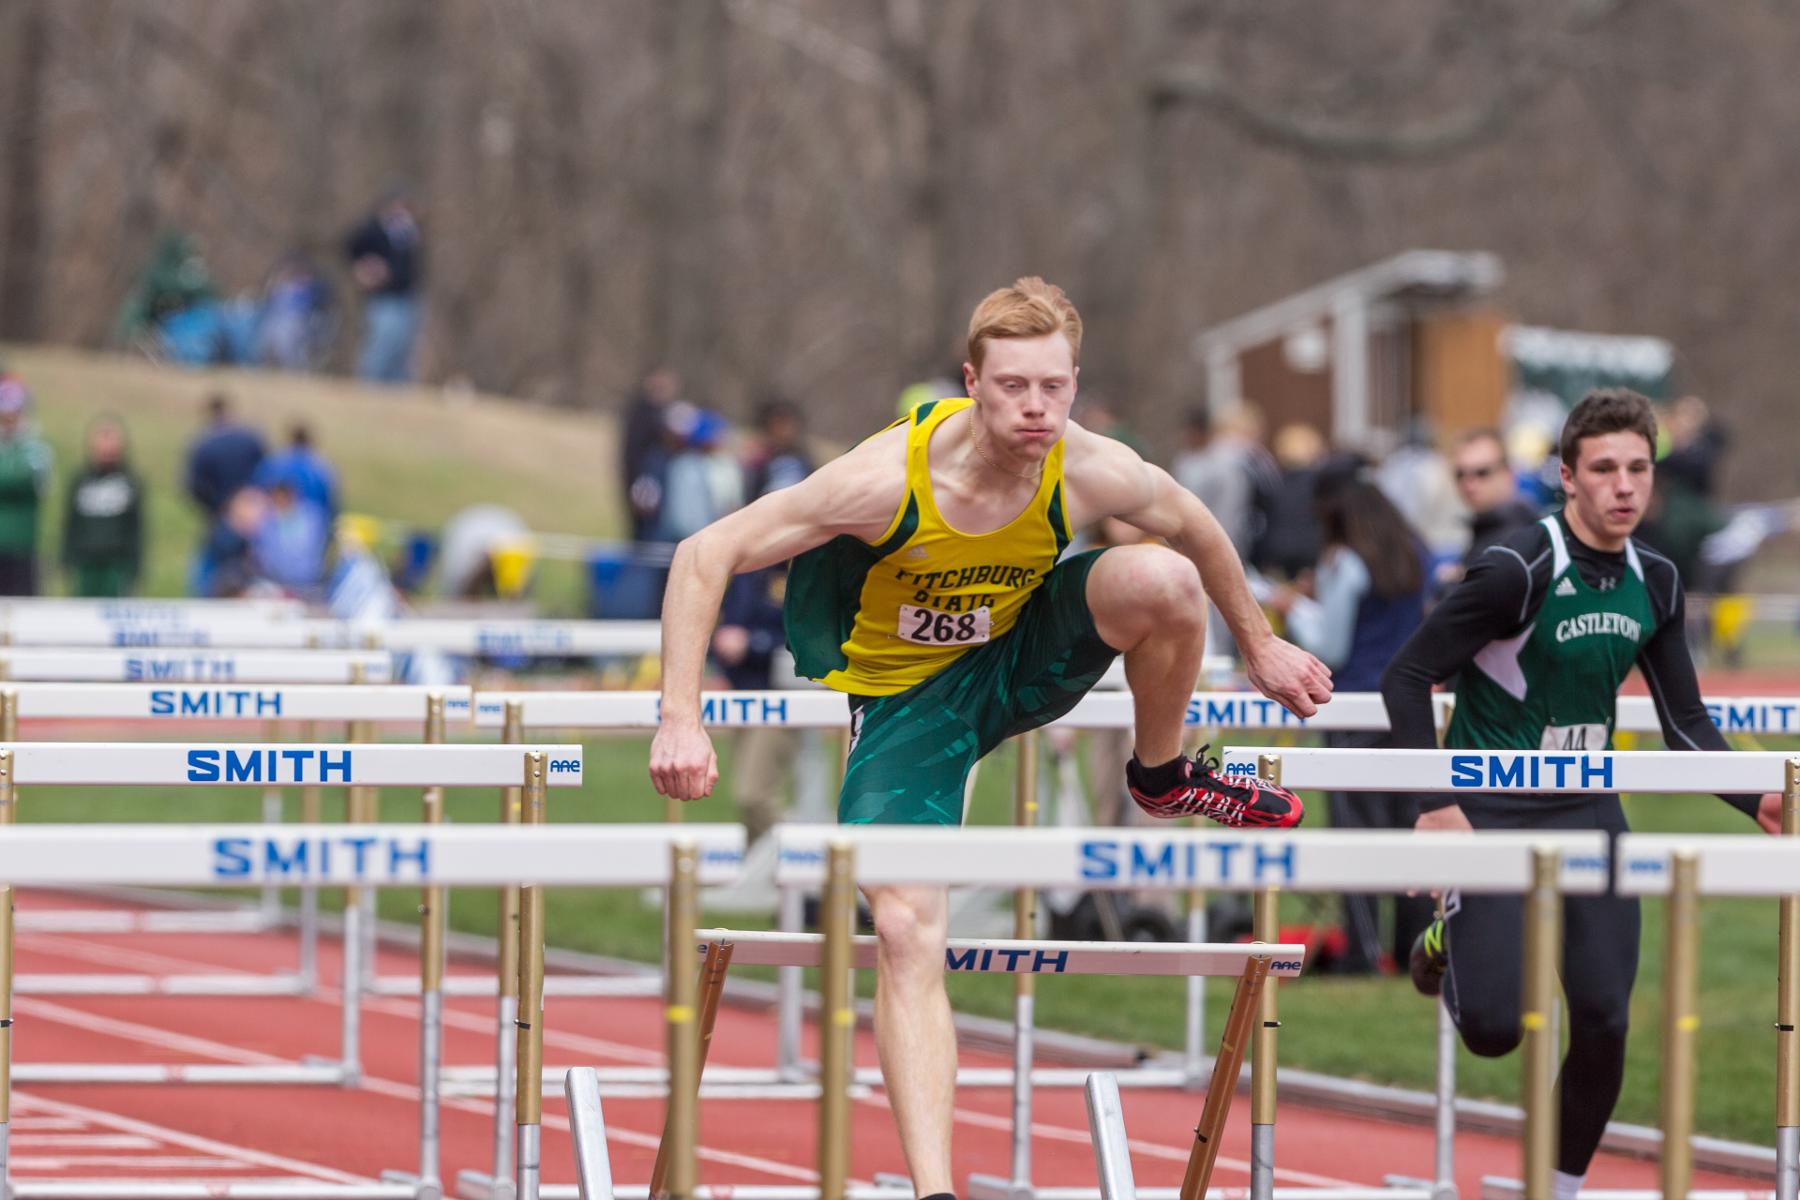 Stalters Named MASCAC Men’s Outdoor Field Athlete Of The Week